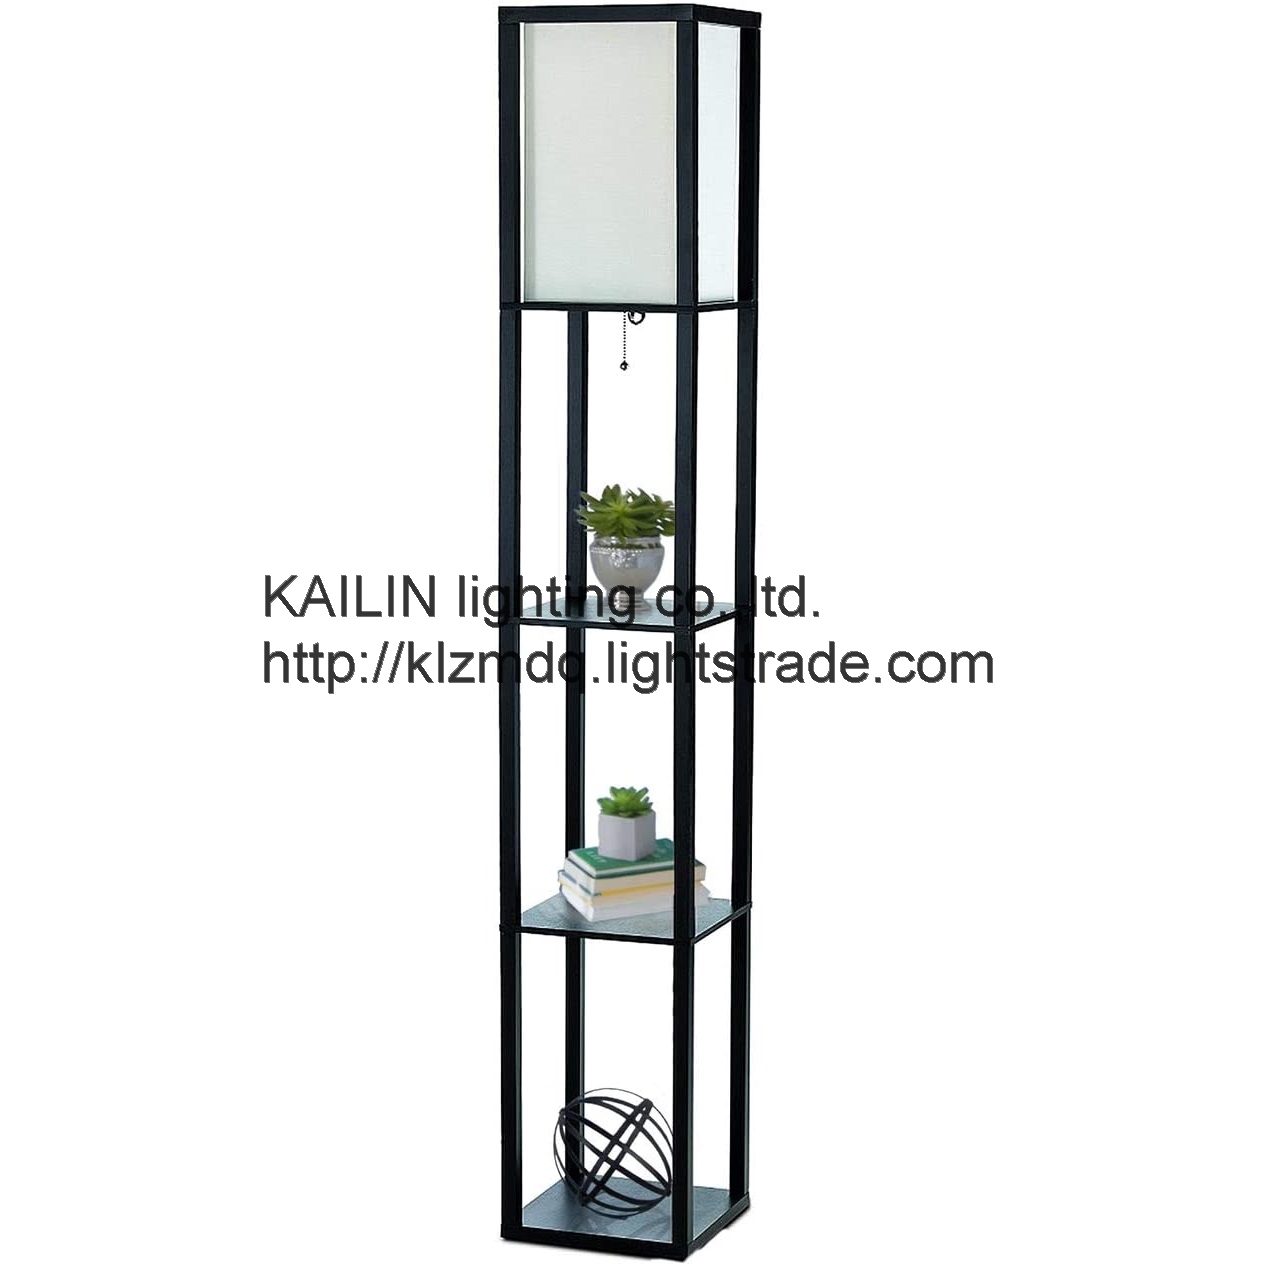 Modern Shelf Floor Lamp with Lamp Shade and LED Bulb - Coner Display Floor Lamps with Shelves for Li